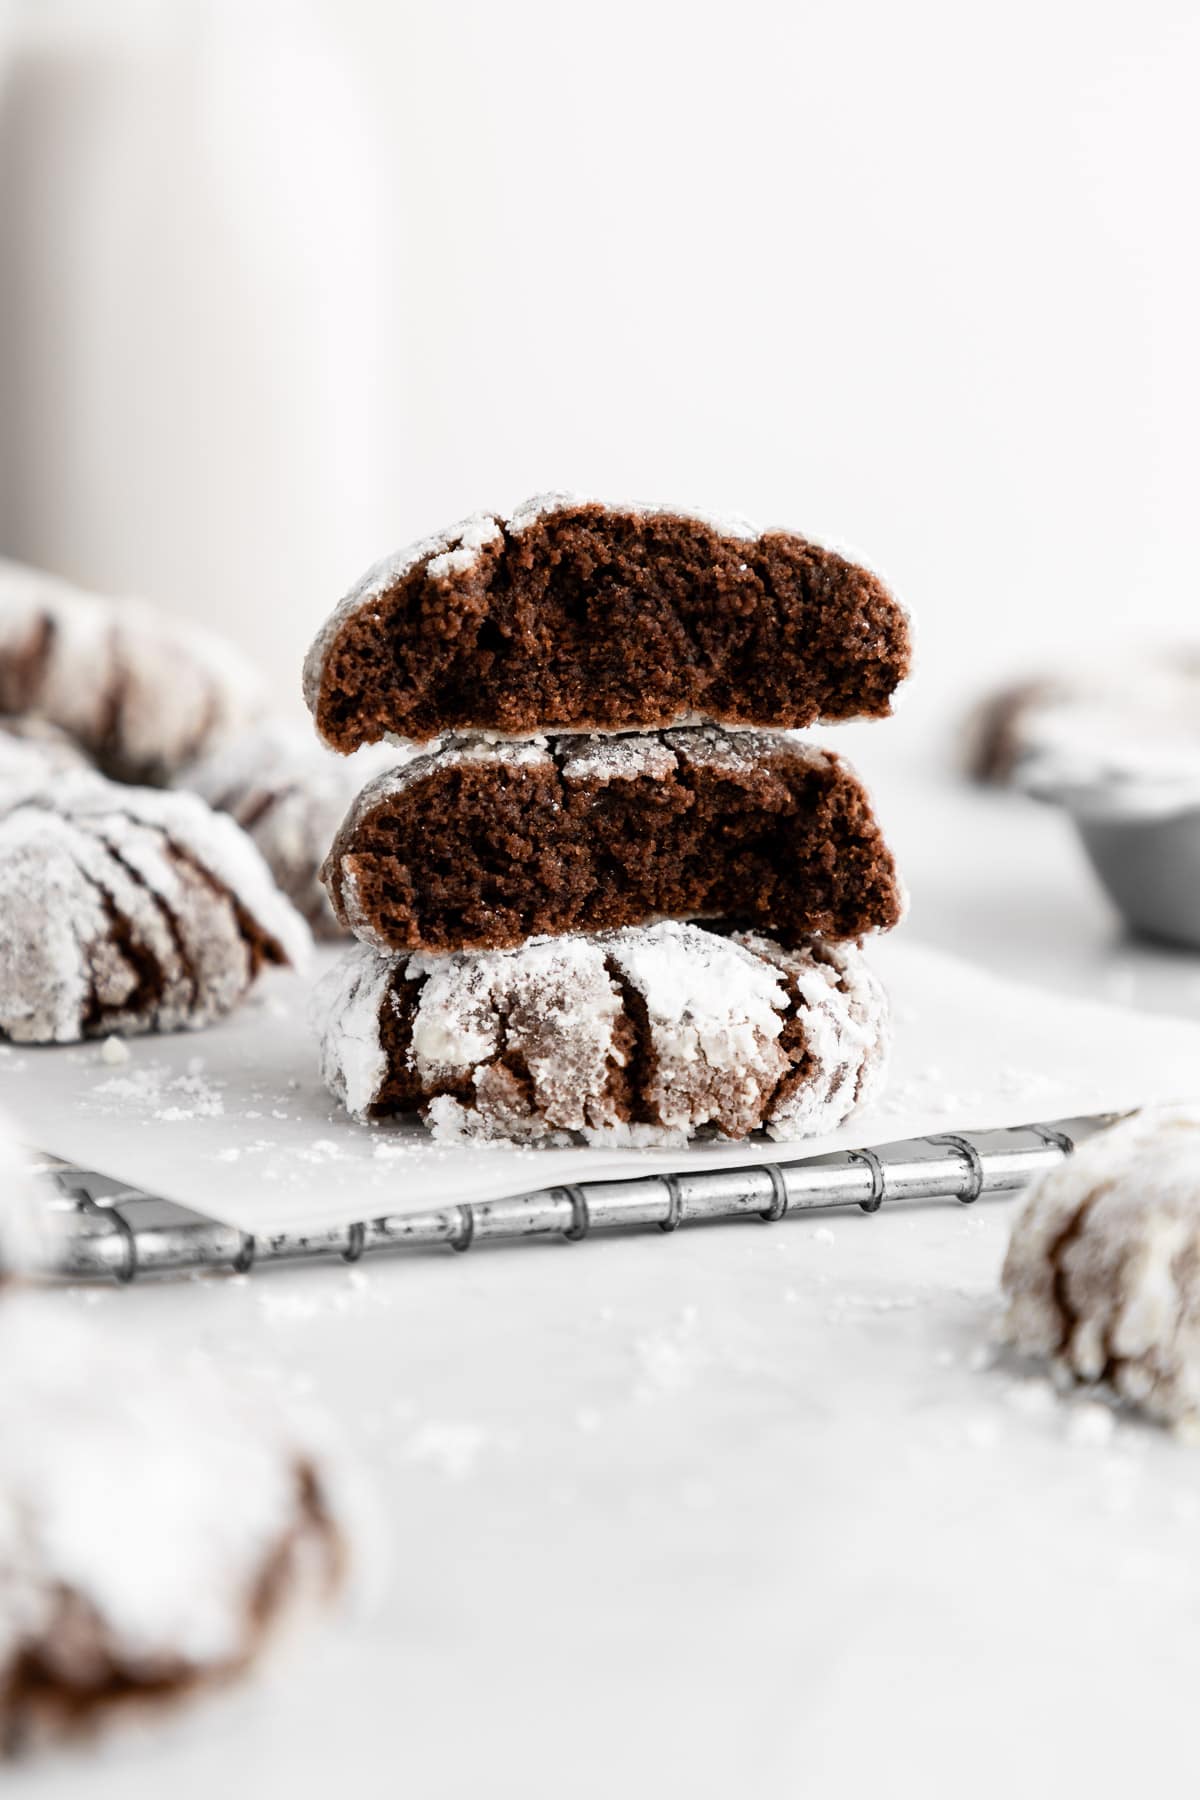 a stack of vegan chocolate crinkle cookies cut in half showing the cross section